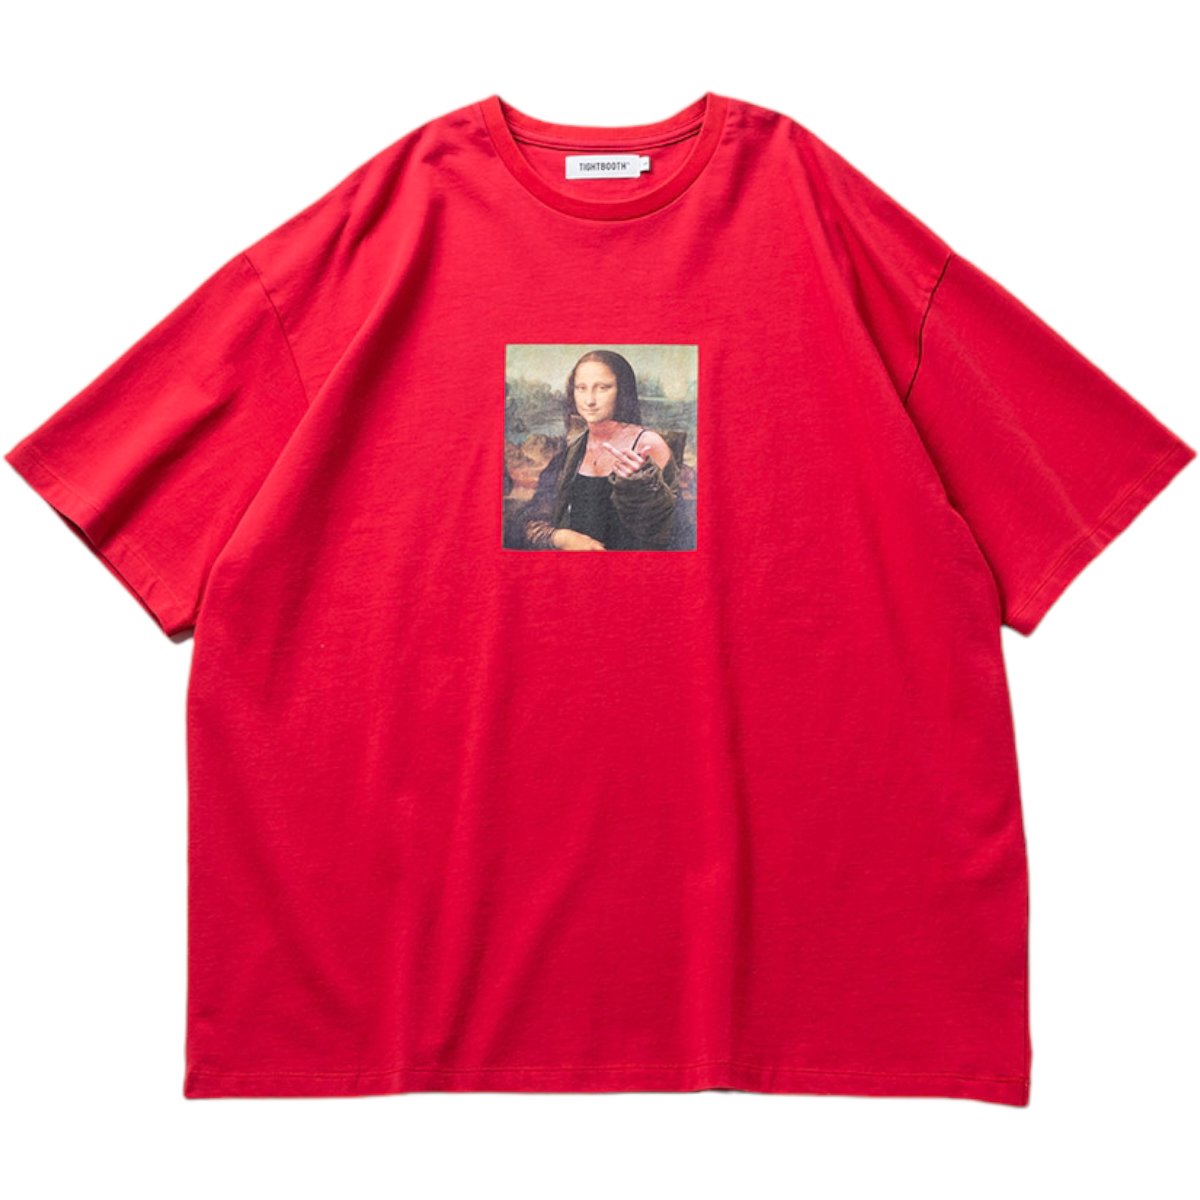 TIGHTBOOTH<BR>TBPR / SIT ON IT T-SHIRT(RED)